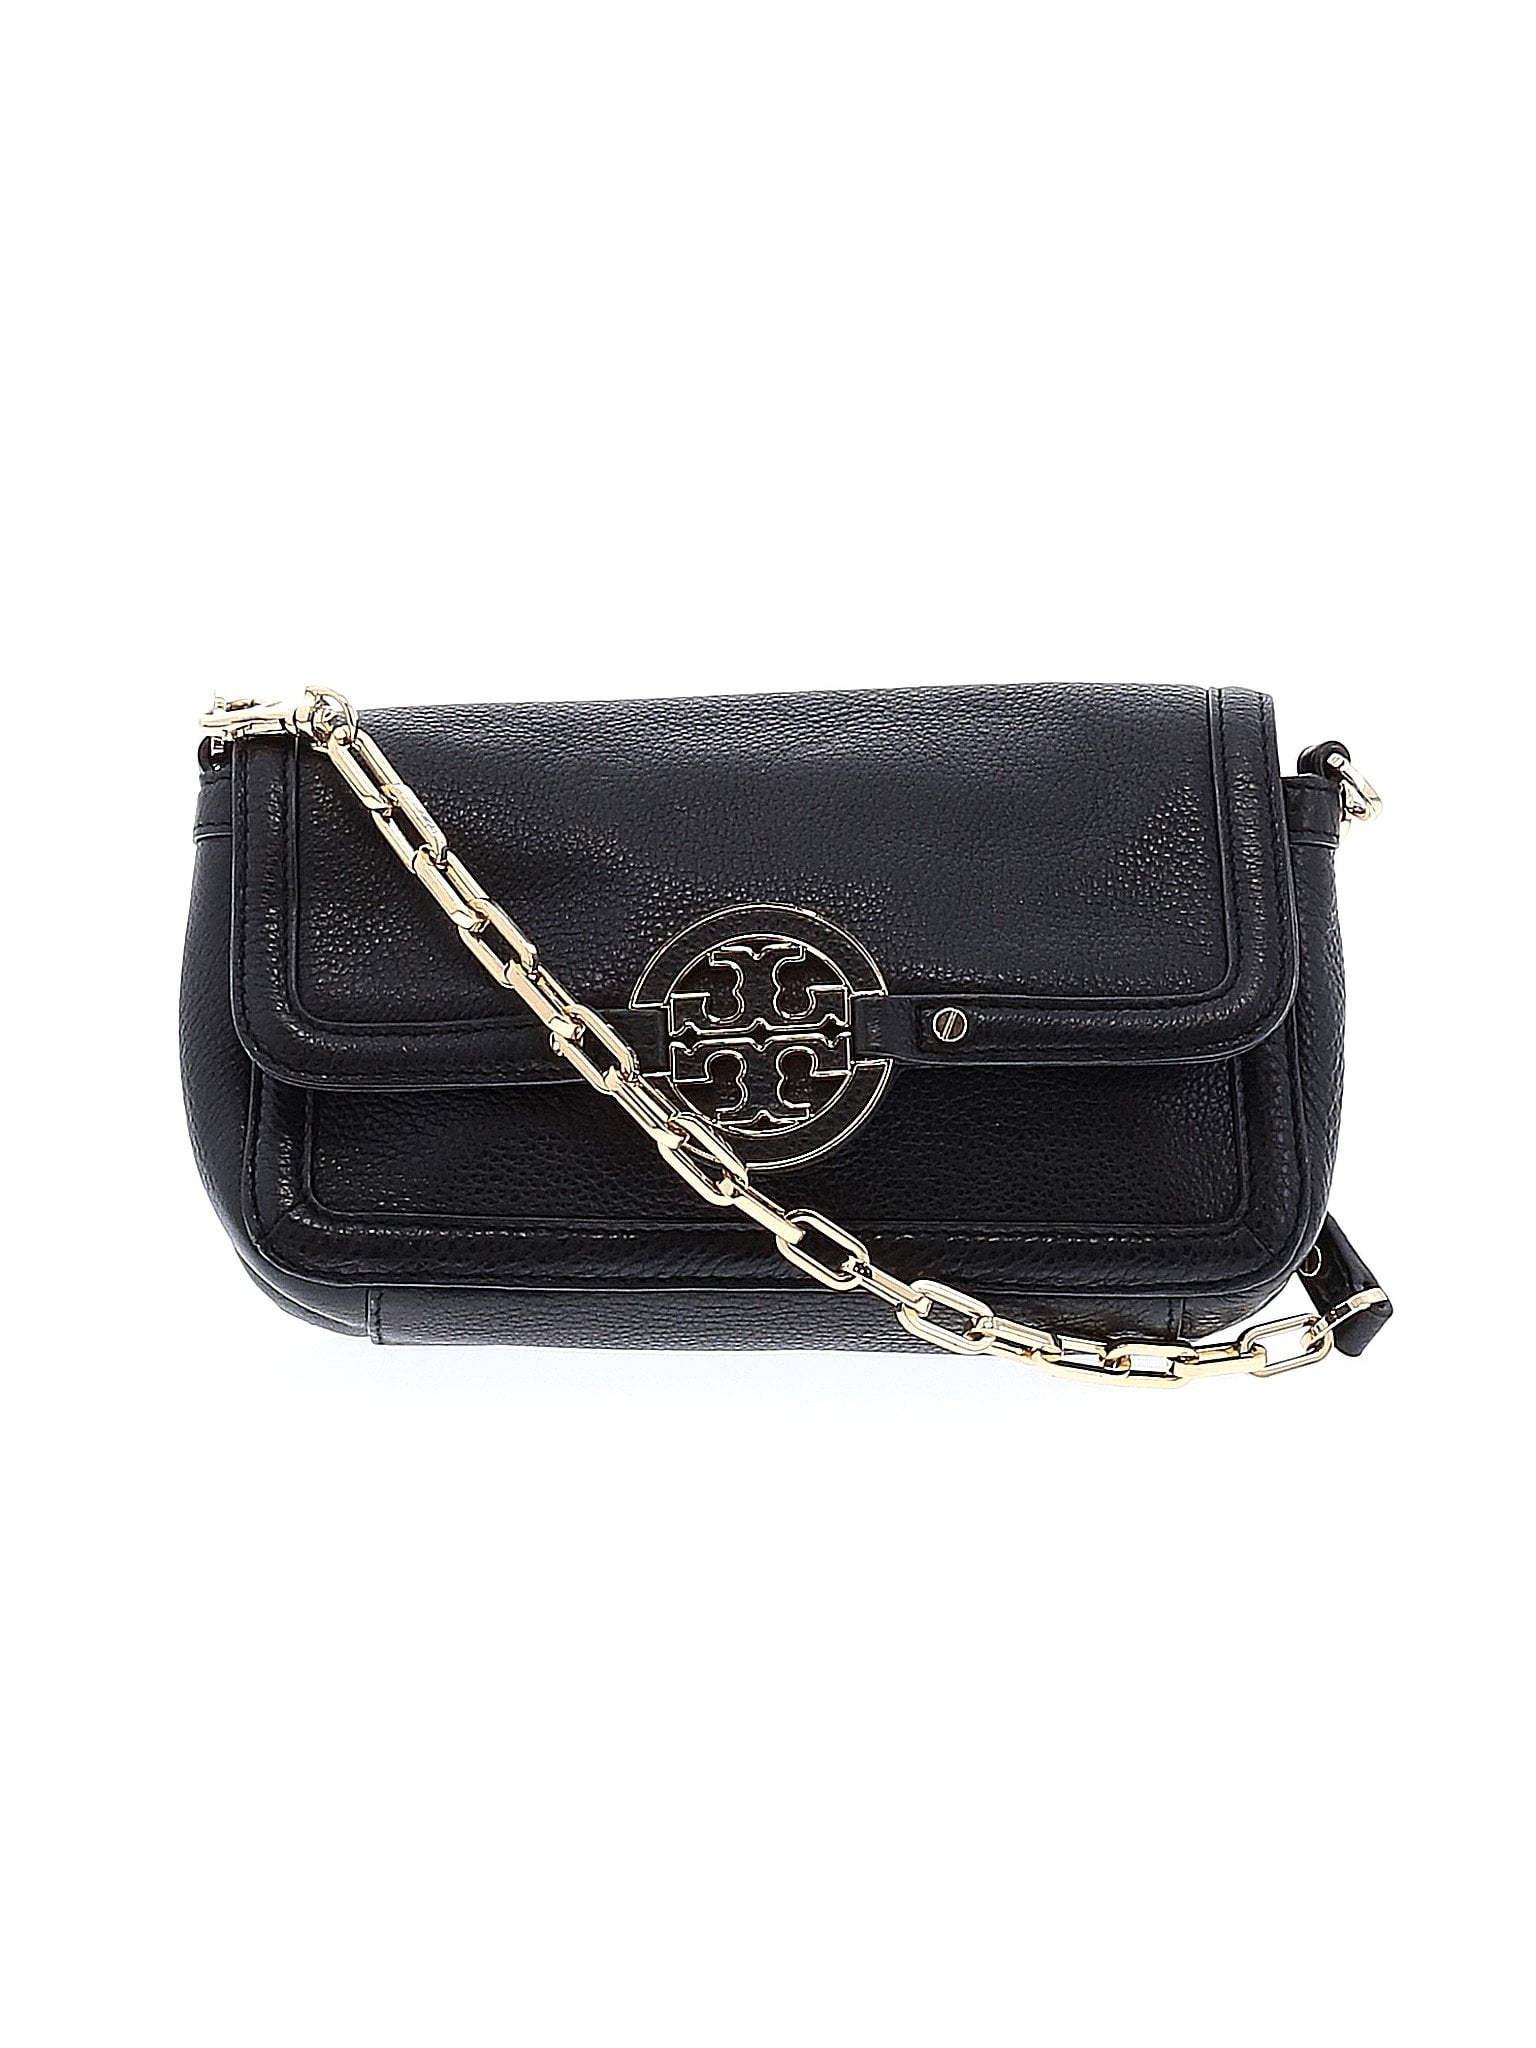 Buy Pre-Owned Tory Burch Womens One Size Fits All Leather Crossbody Bag  Online at Lowest Price in Ubuy Maldives. 487546790